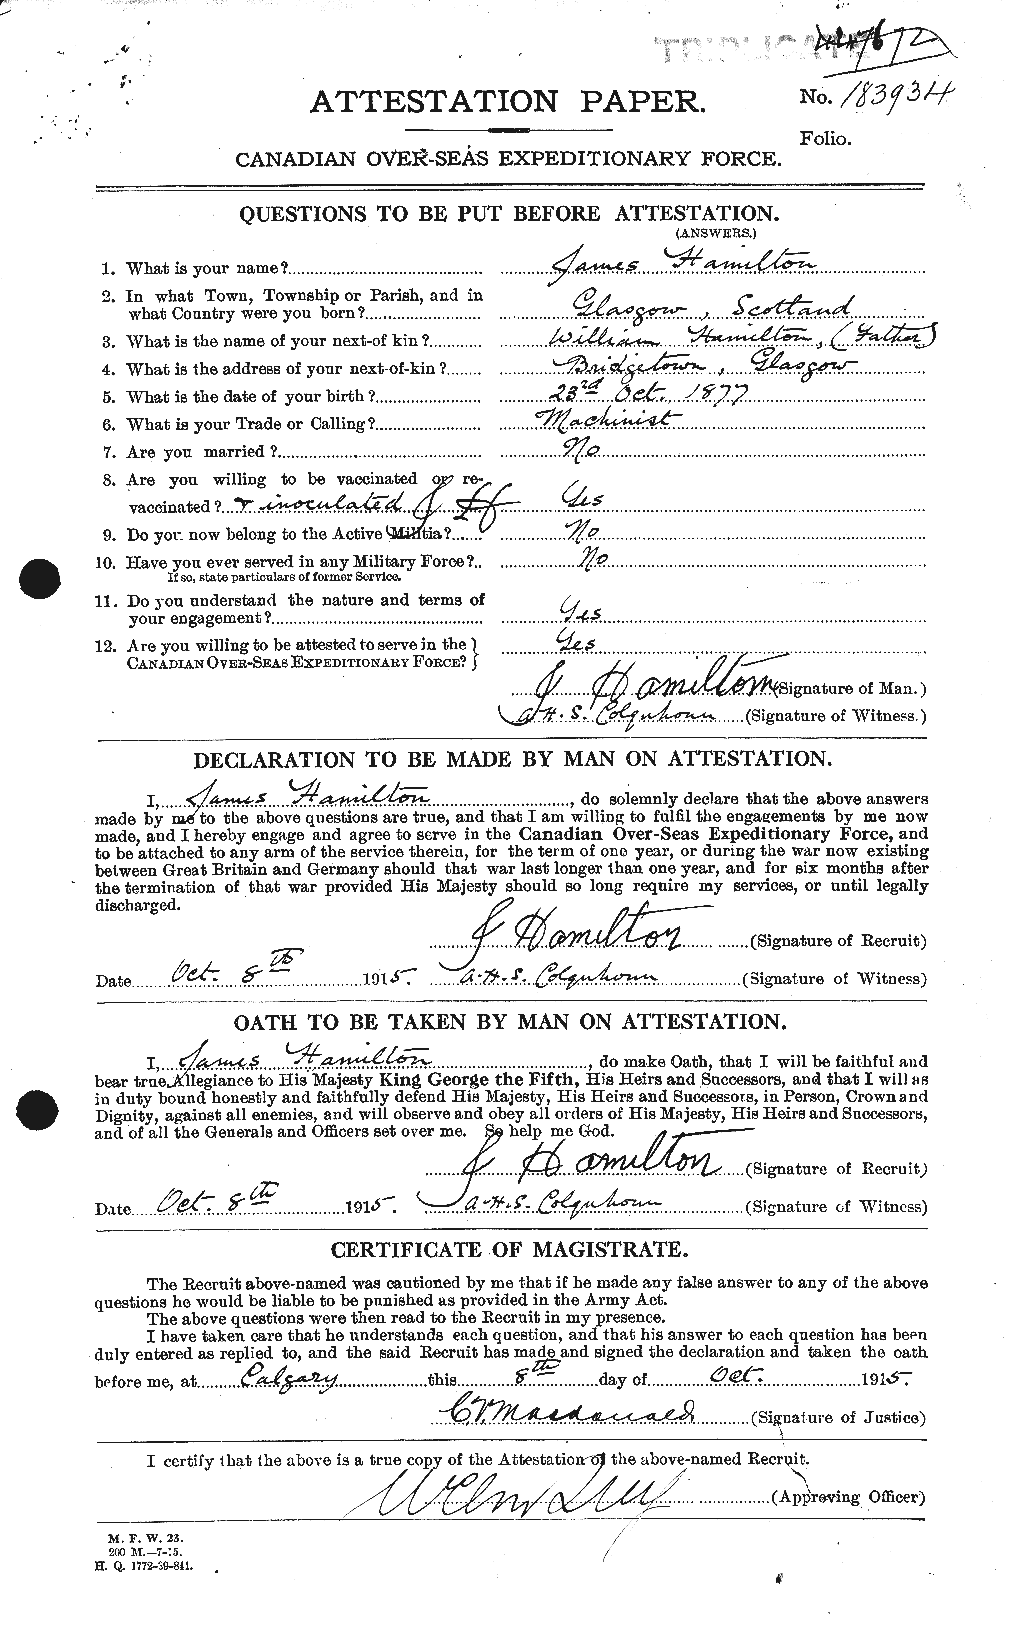 Personnel Records of the First World War - CEF 372959a